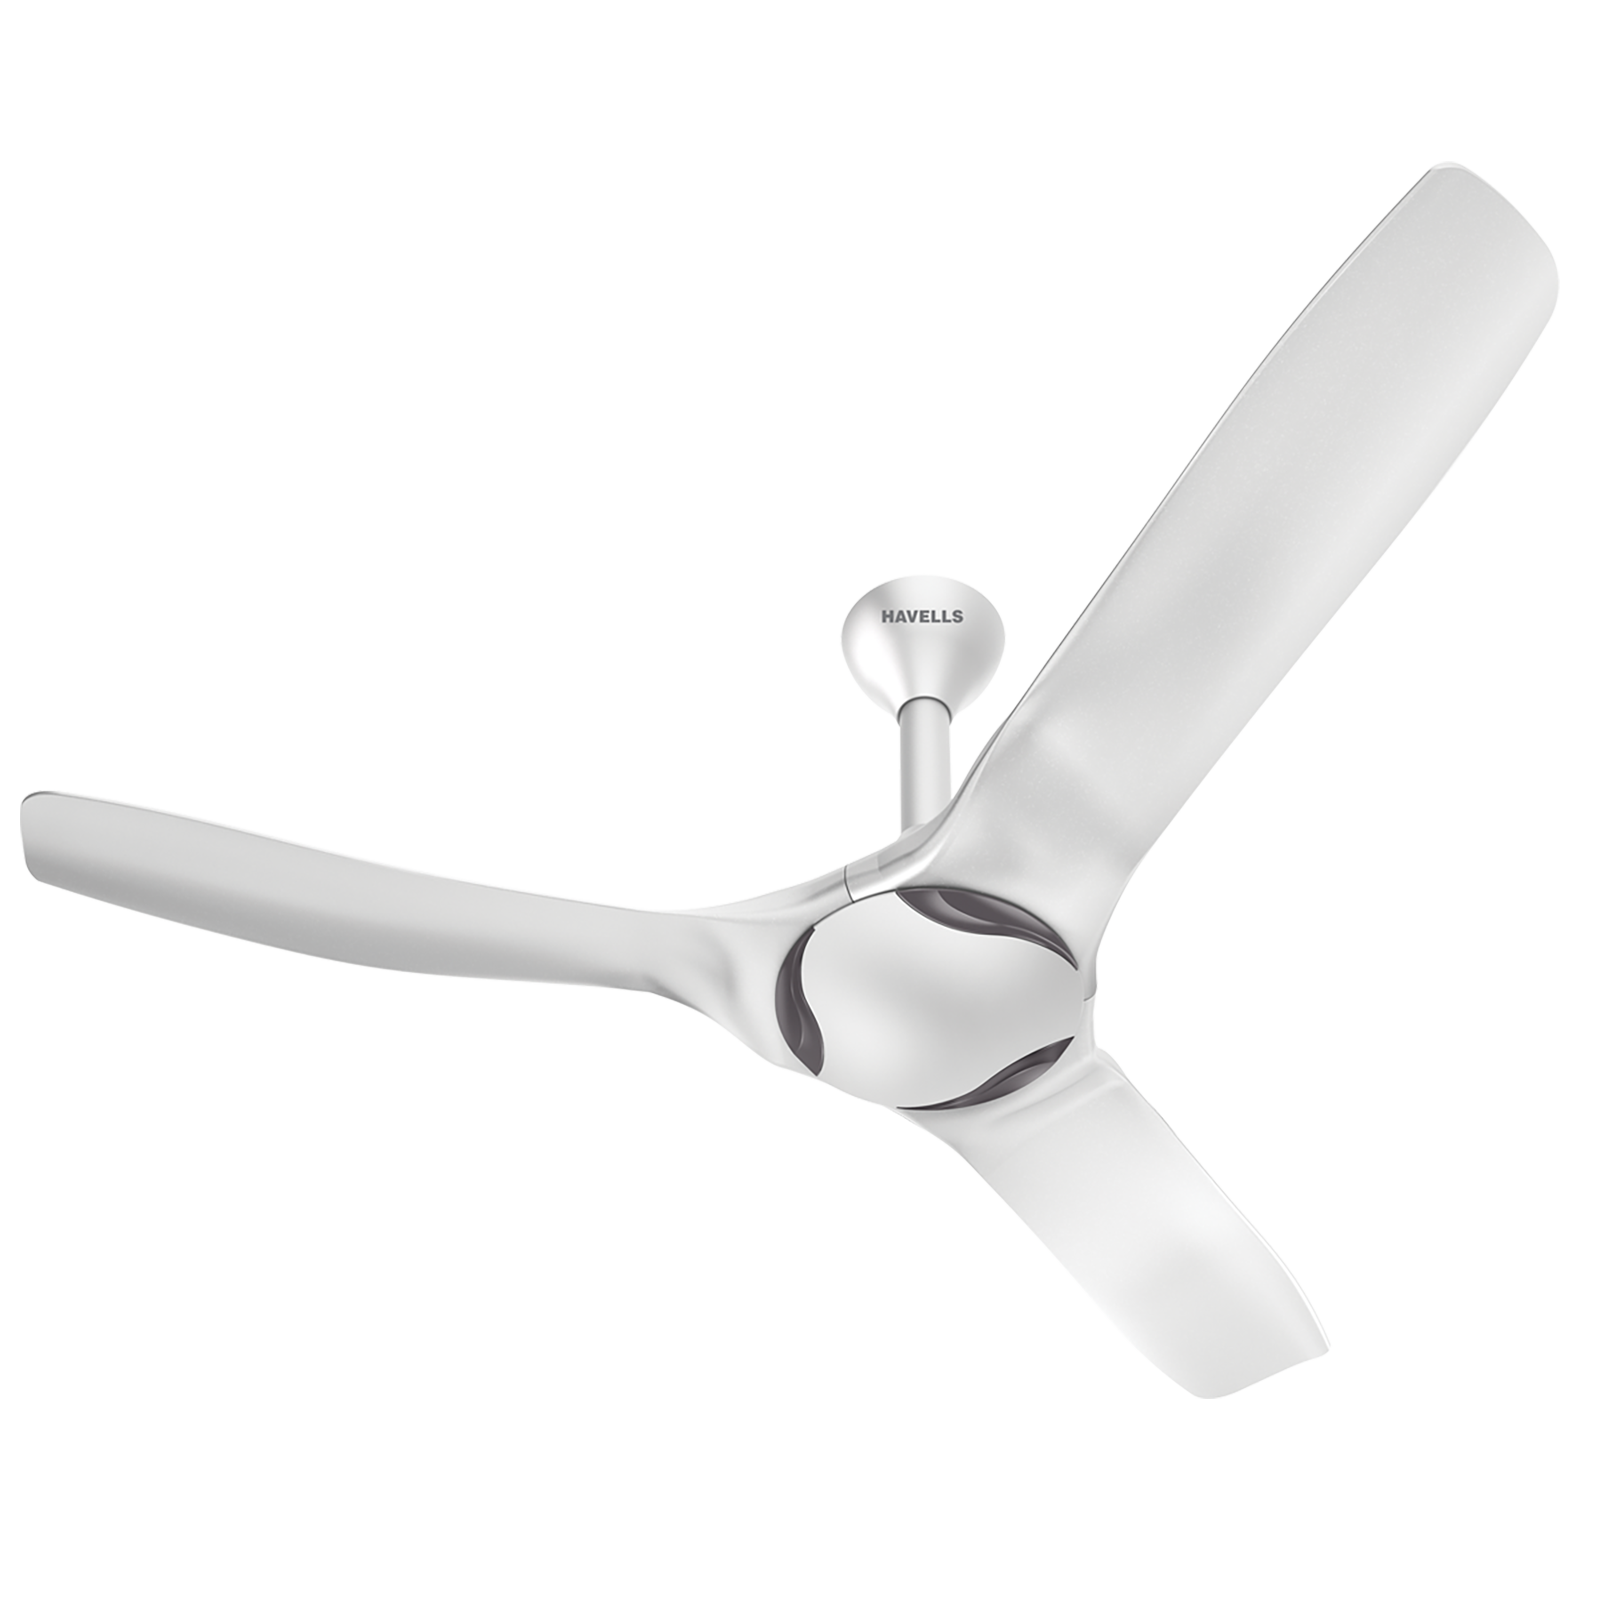 Havells Stealth Cruise Ceiling Fan (FHCSBSTPWT52, Pearl White)